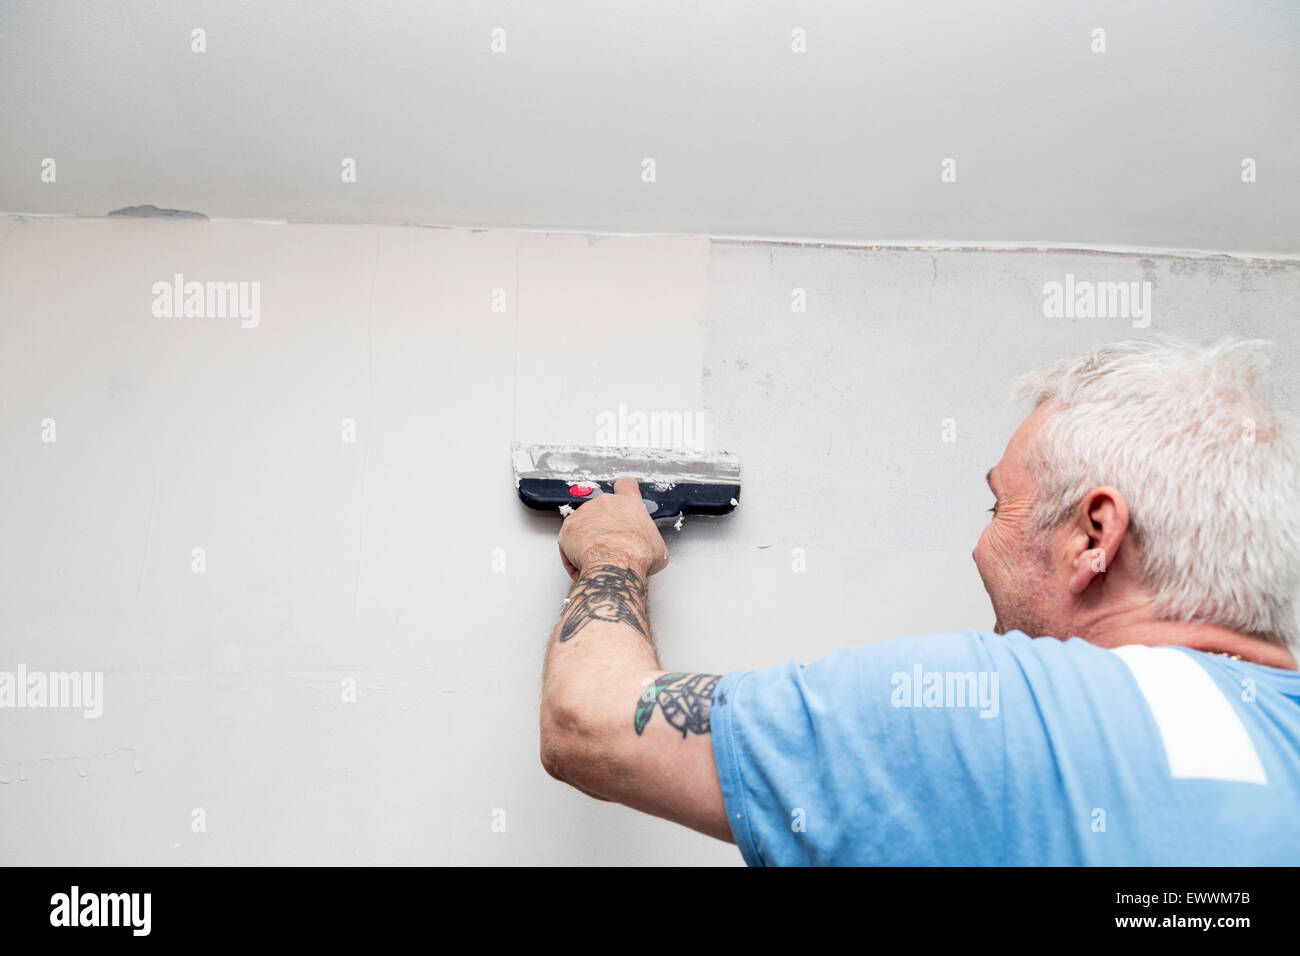 Painter spackling a concrete wall in preperation before painting it Stock Photo